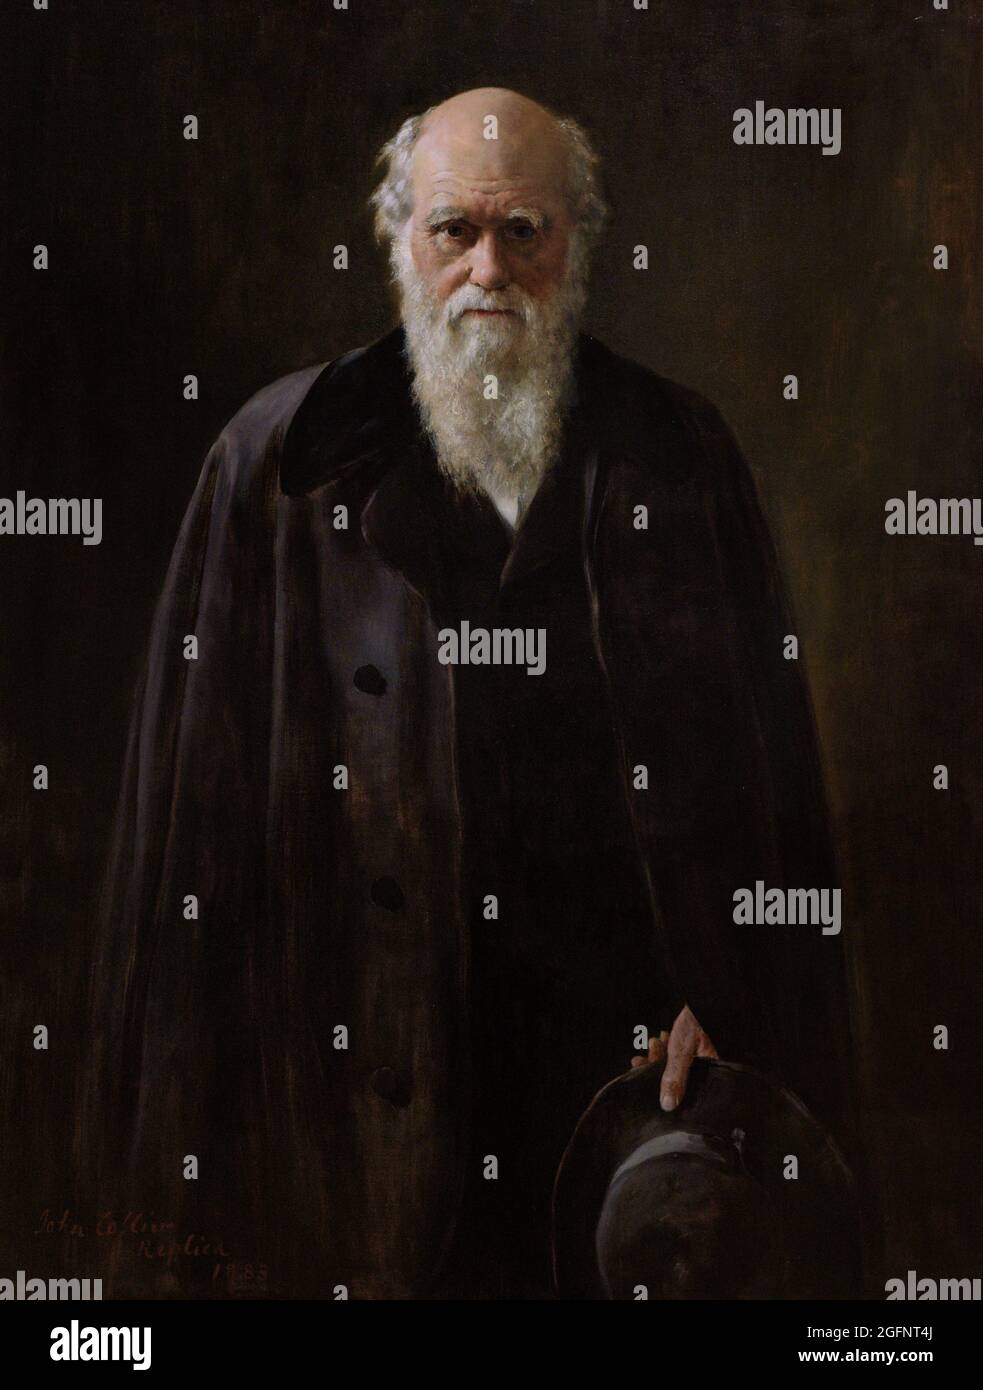 Charles Darwin (1809-1882). British scientist and naturalist. Author of the On the Origin of Species, 1859. Portrait, copy by John Collier (1850-1934) based on a work of 1881 made by Collier for the Linnaean Society. Oil on canvas (125,7 x 96,5 cm), 1883. National Portrait Gallery. London, England, United Kingdom. Stock Photo